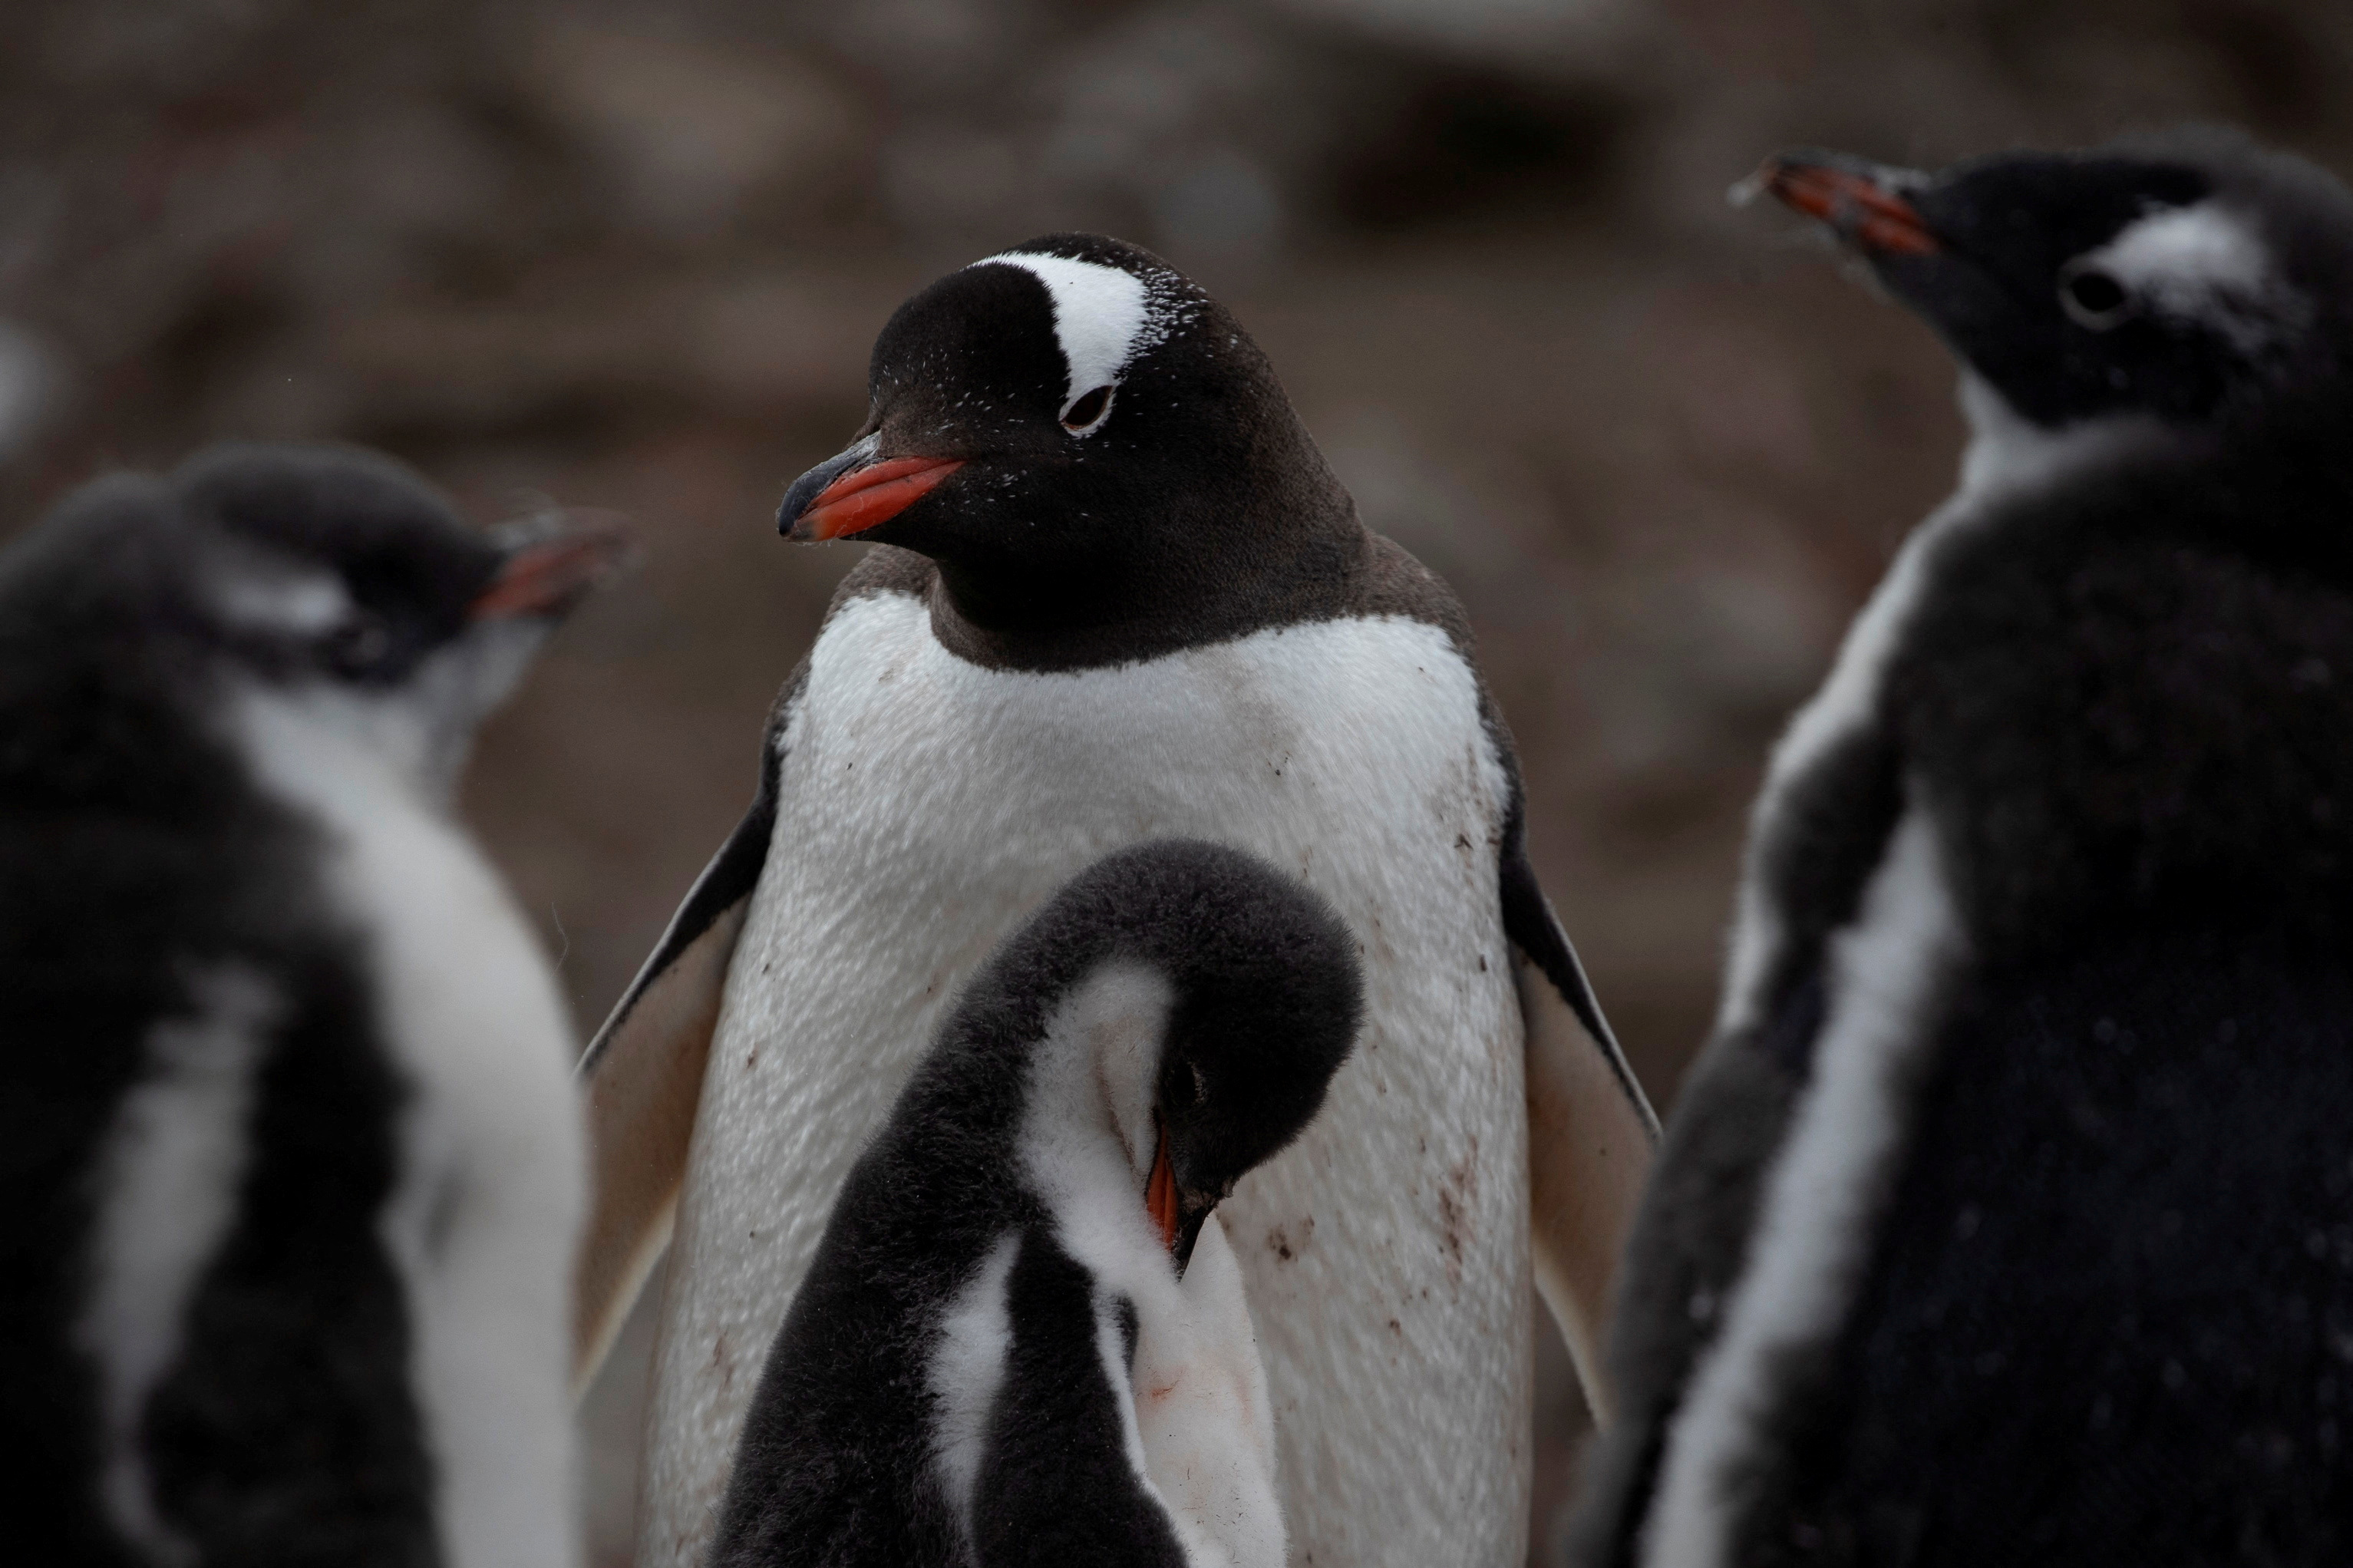 On board the Antarctic expedition that reveals dramatic penguin decline